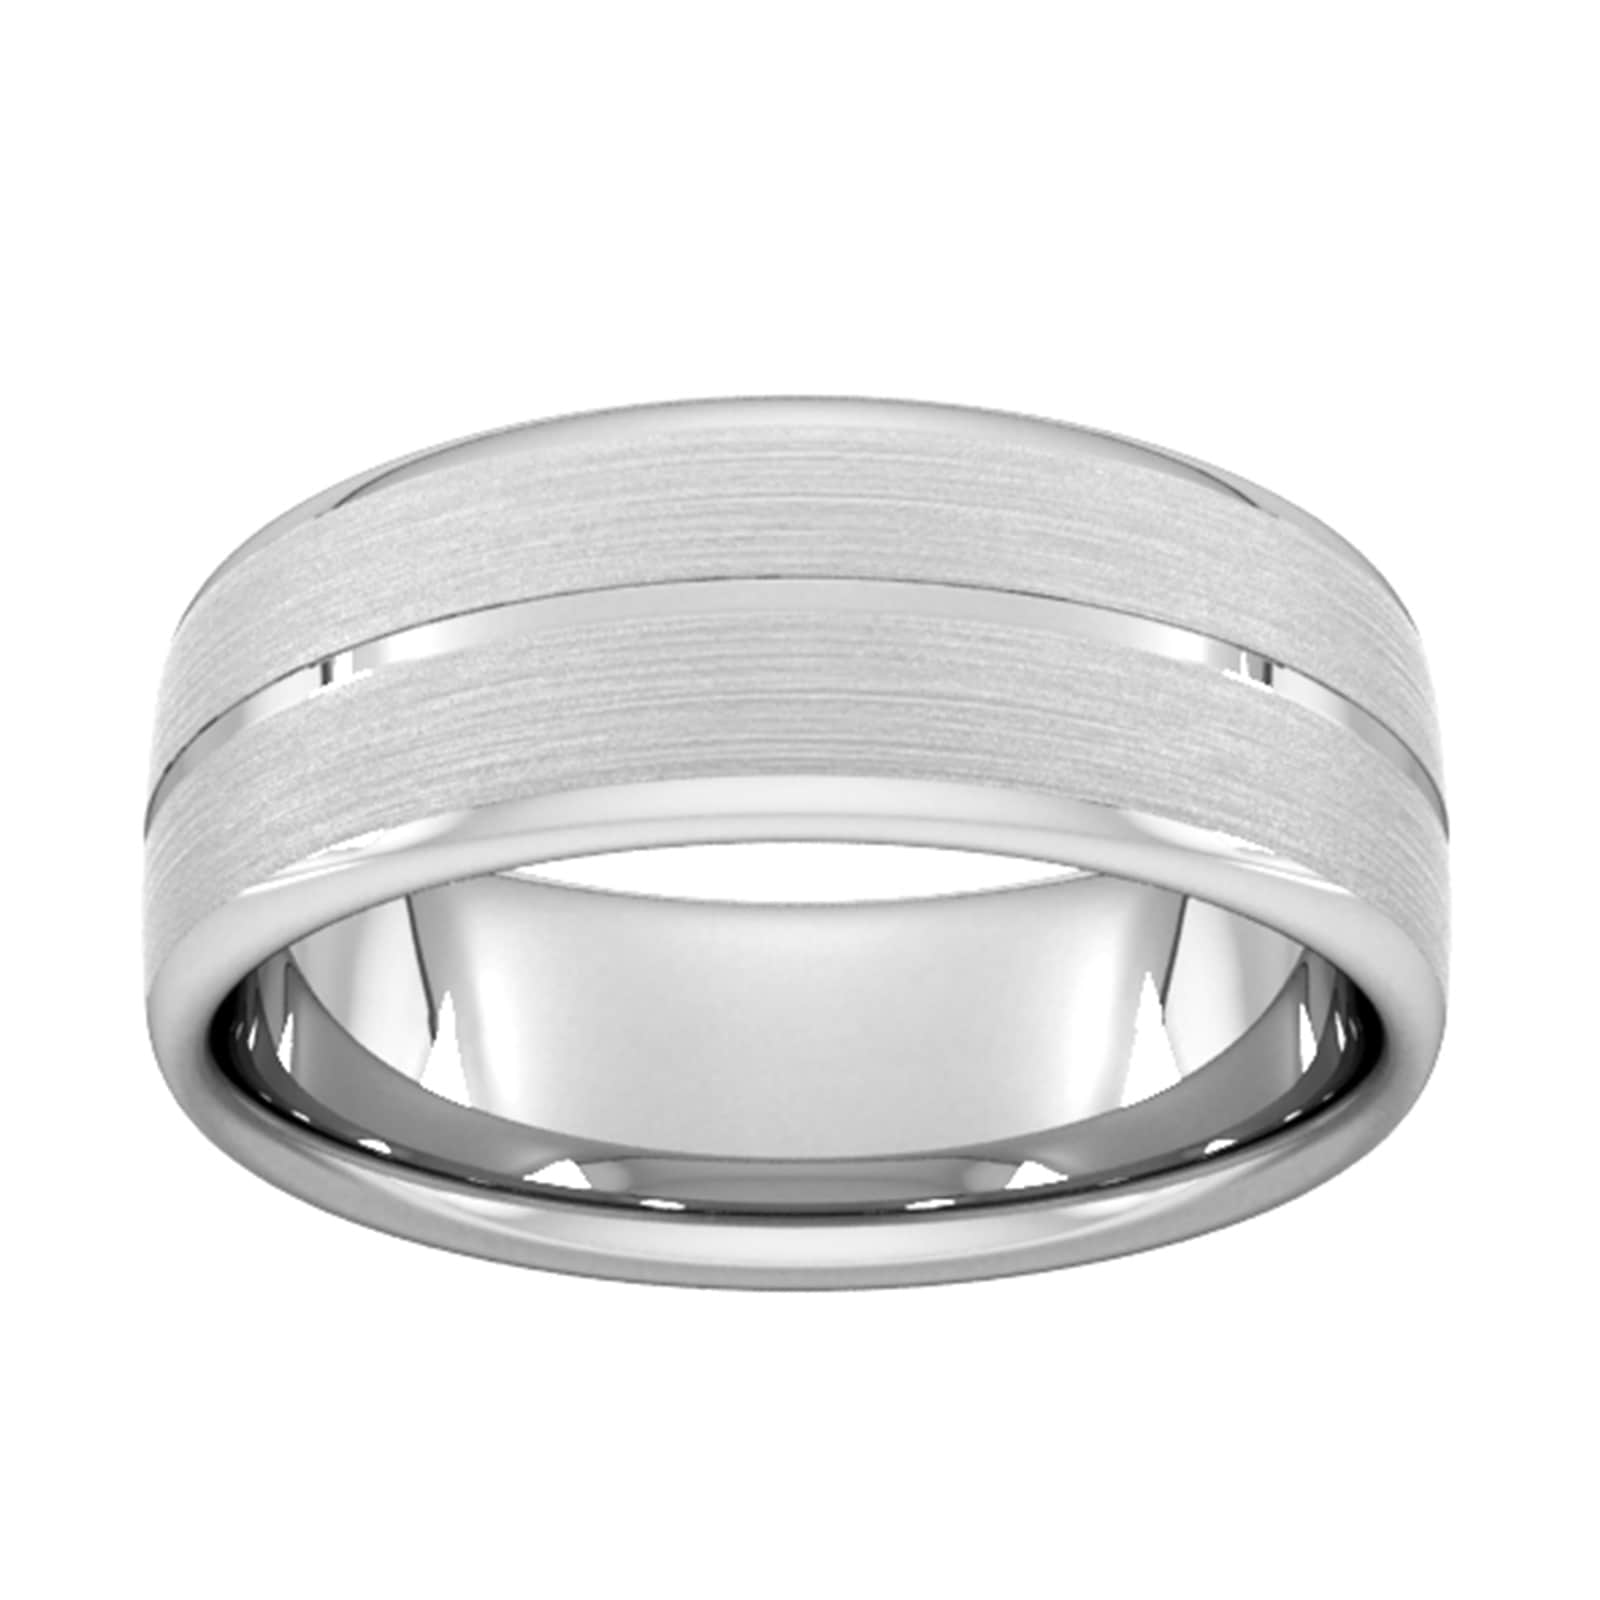 8mm D Shape Heavy Centre Groove With Chamfered Edge Wedding Ring In 18 Carat White Gold - Ring Size P